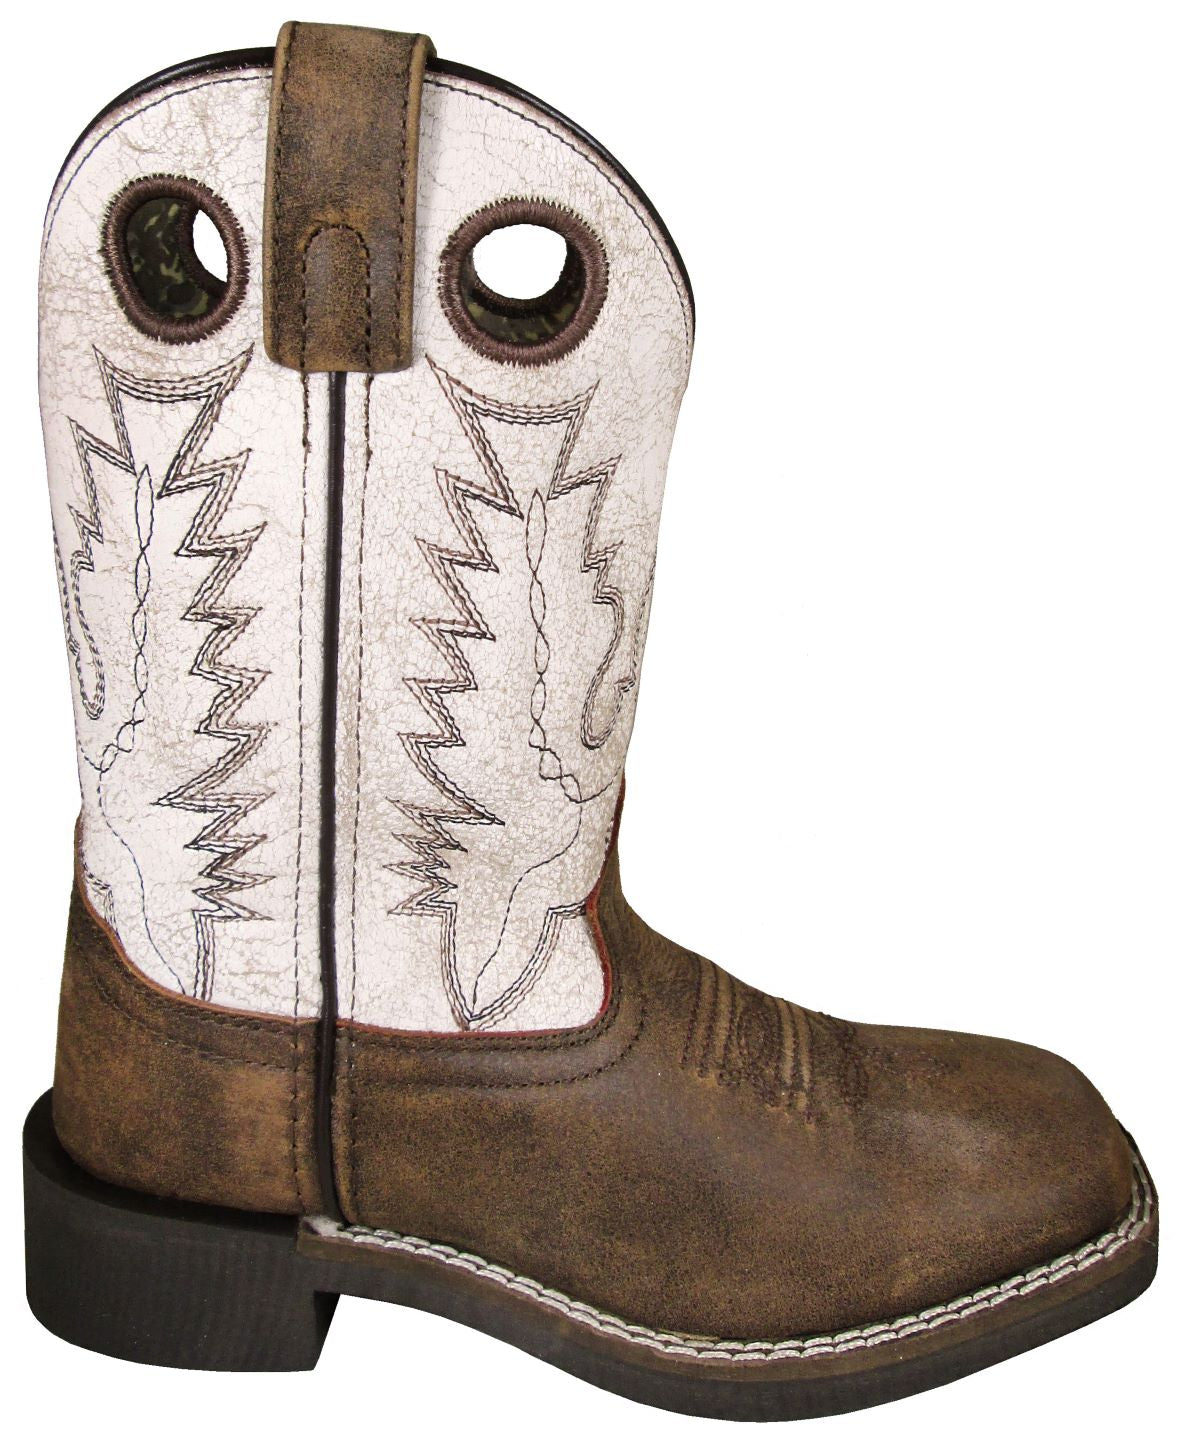 'Smoky Mountain' Children's Drifter Western Square Toe - Brown Distress / Antique White